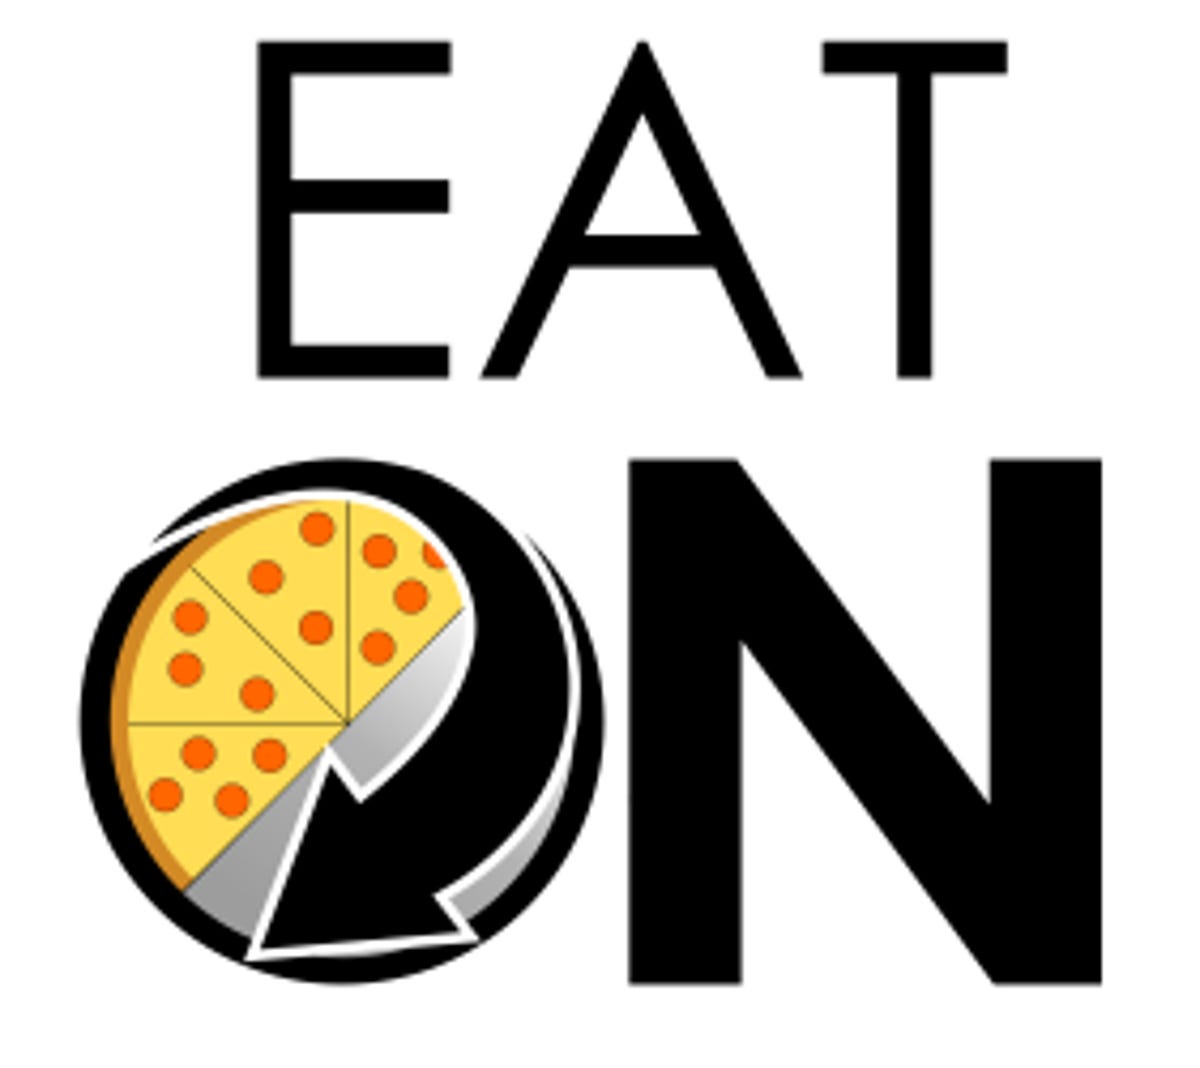 EatOn is a voice-activated restaurant discovery app developed by MIT students.